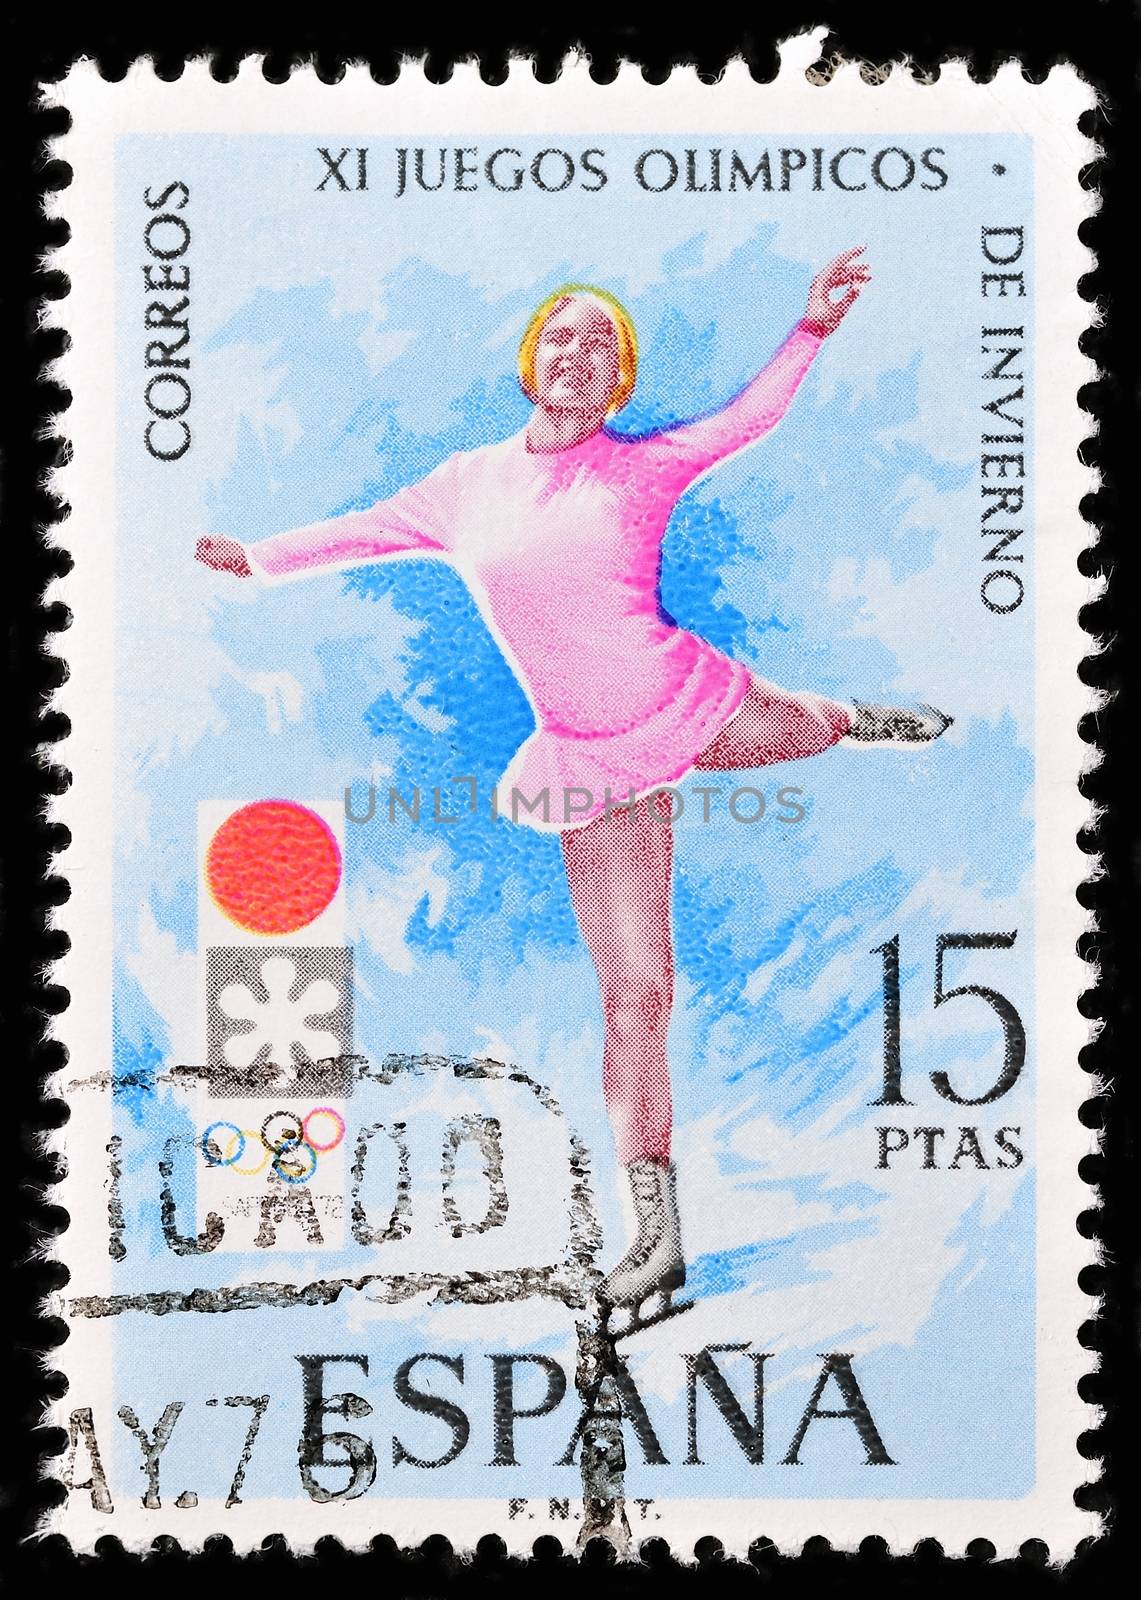 SPAIN - CIRCA 1989: A stamp printed by spain shows the figure skating. , circa 1989